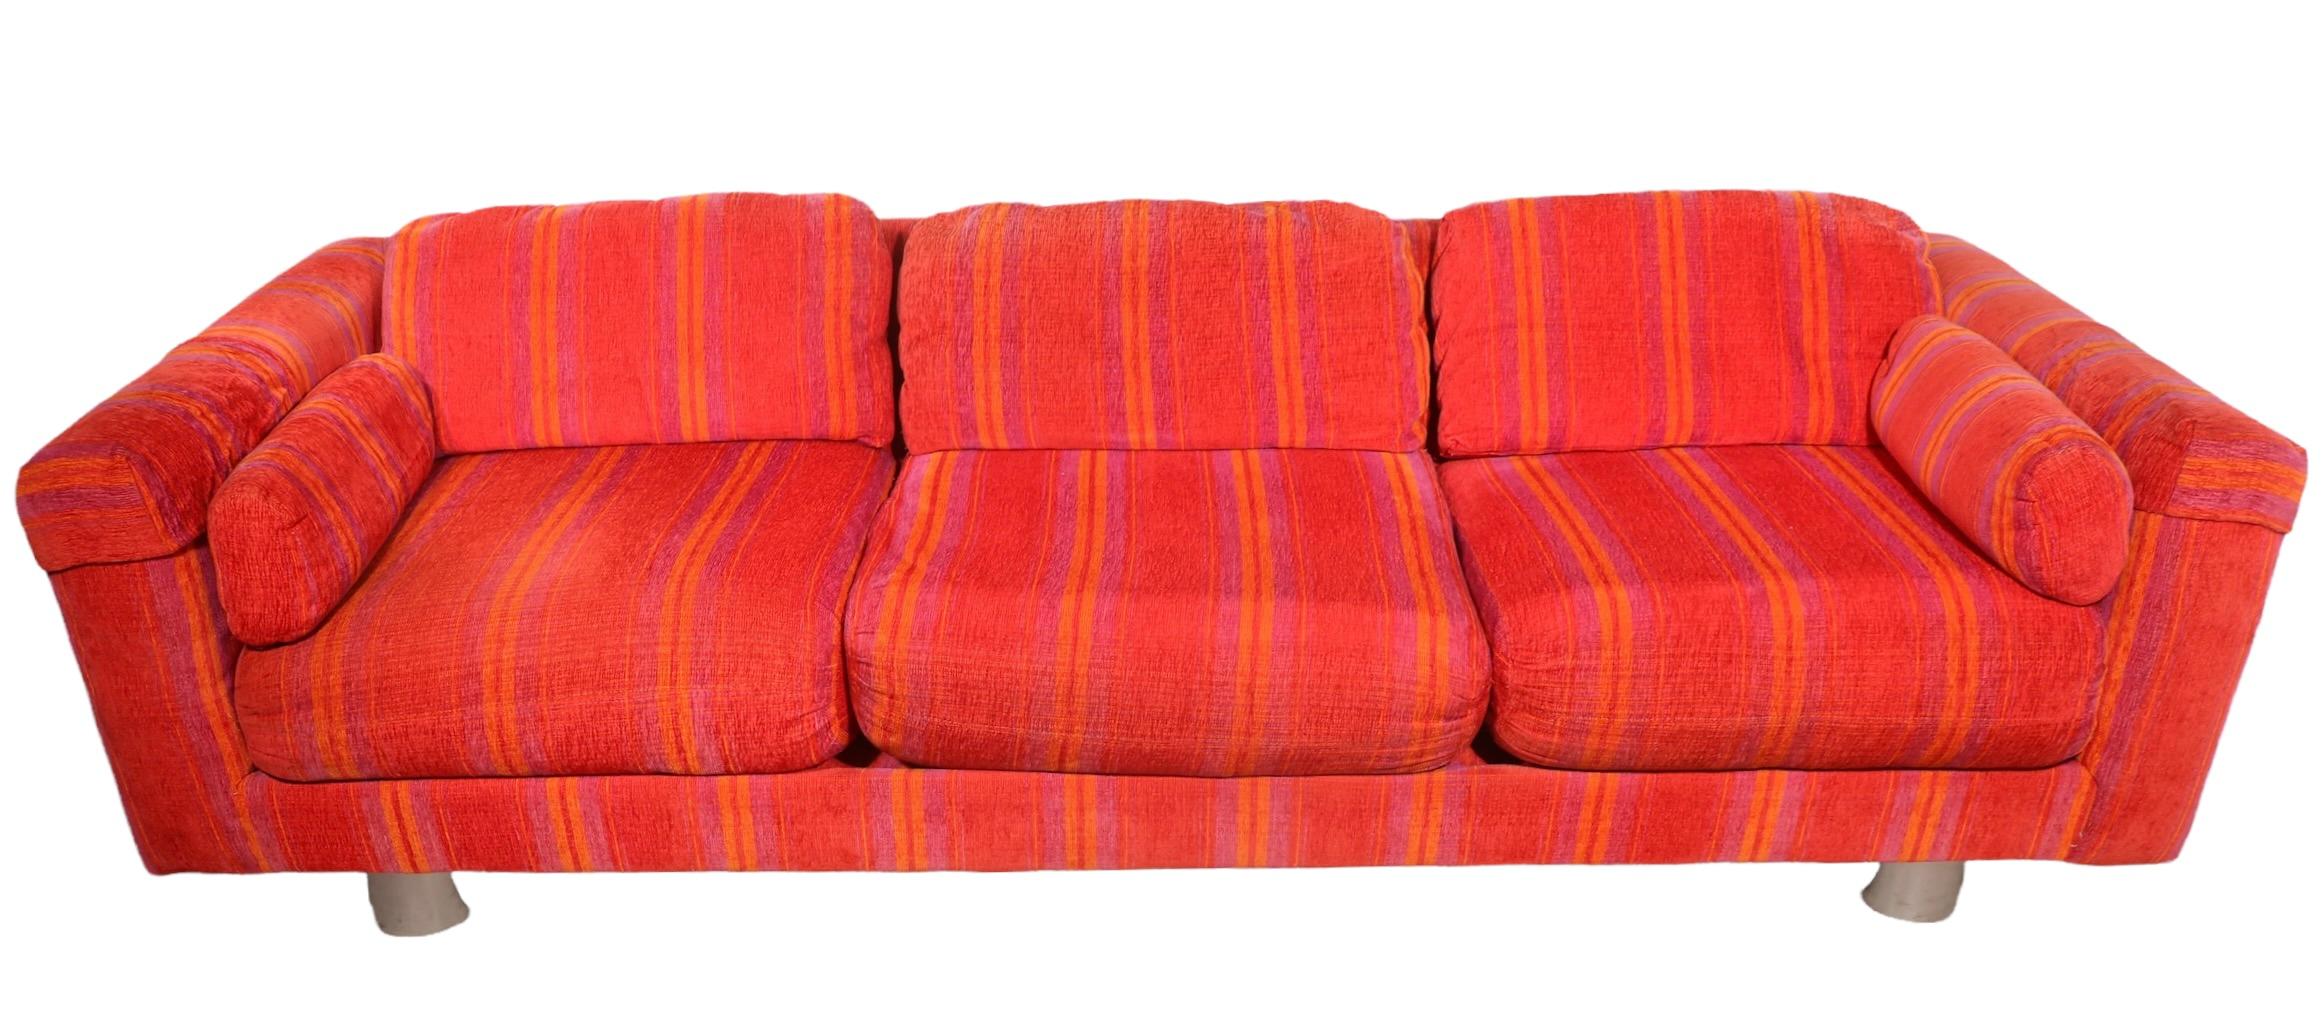 Postmodern Selig Imperial Sofa Possibly by Milo Baughman  For Sale 7